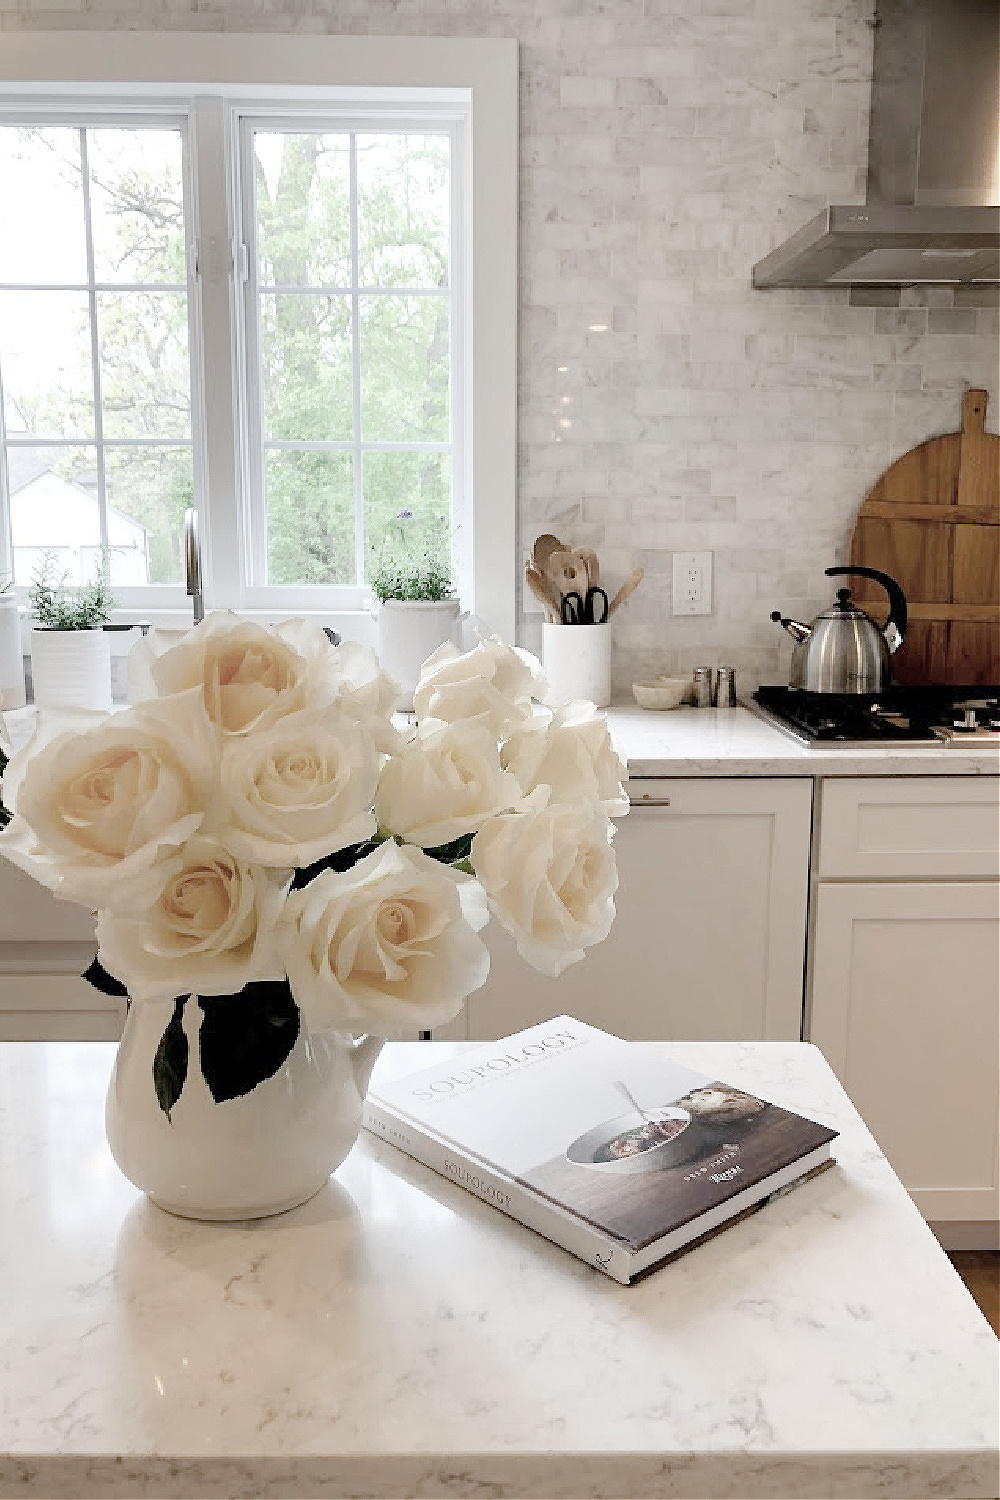 Minuet quartz topped industrial cart in my kitchen with white roses in pitcher - Hello Lovely Studio. #modernfrench #minuetquartz